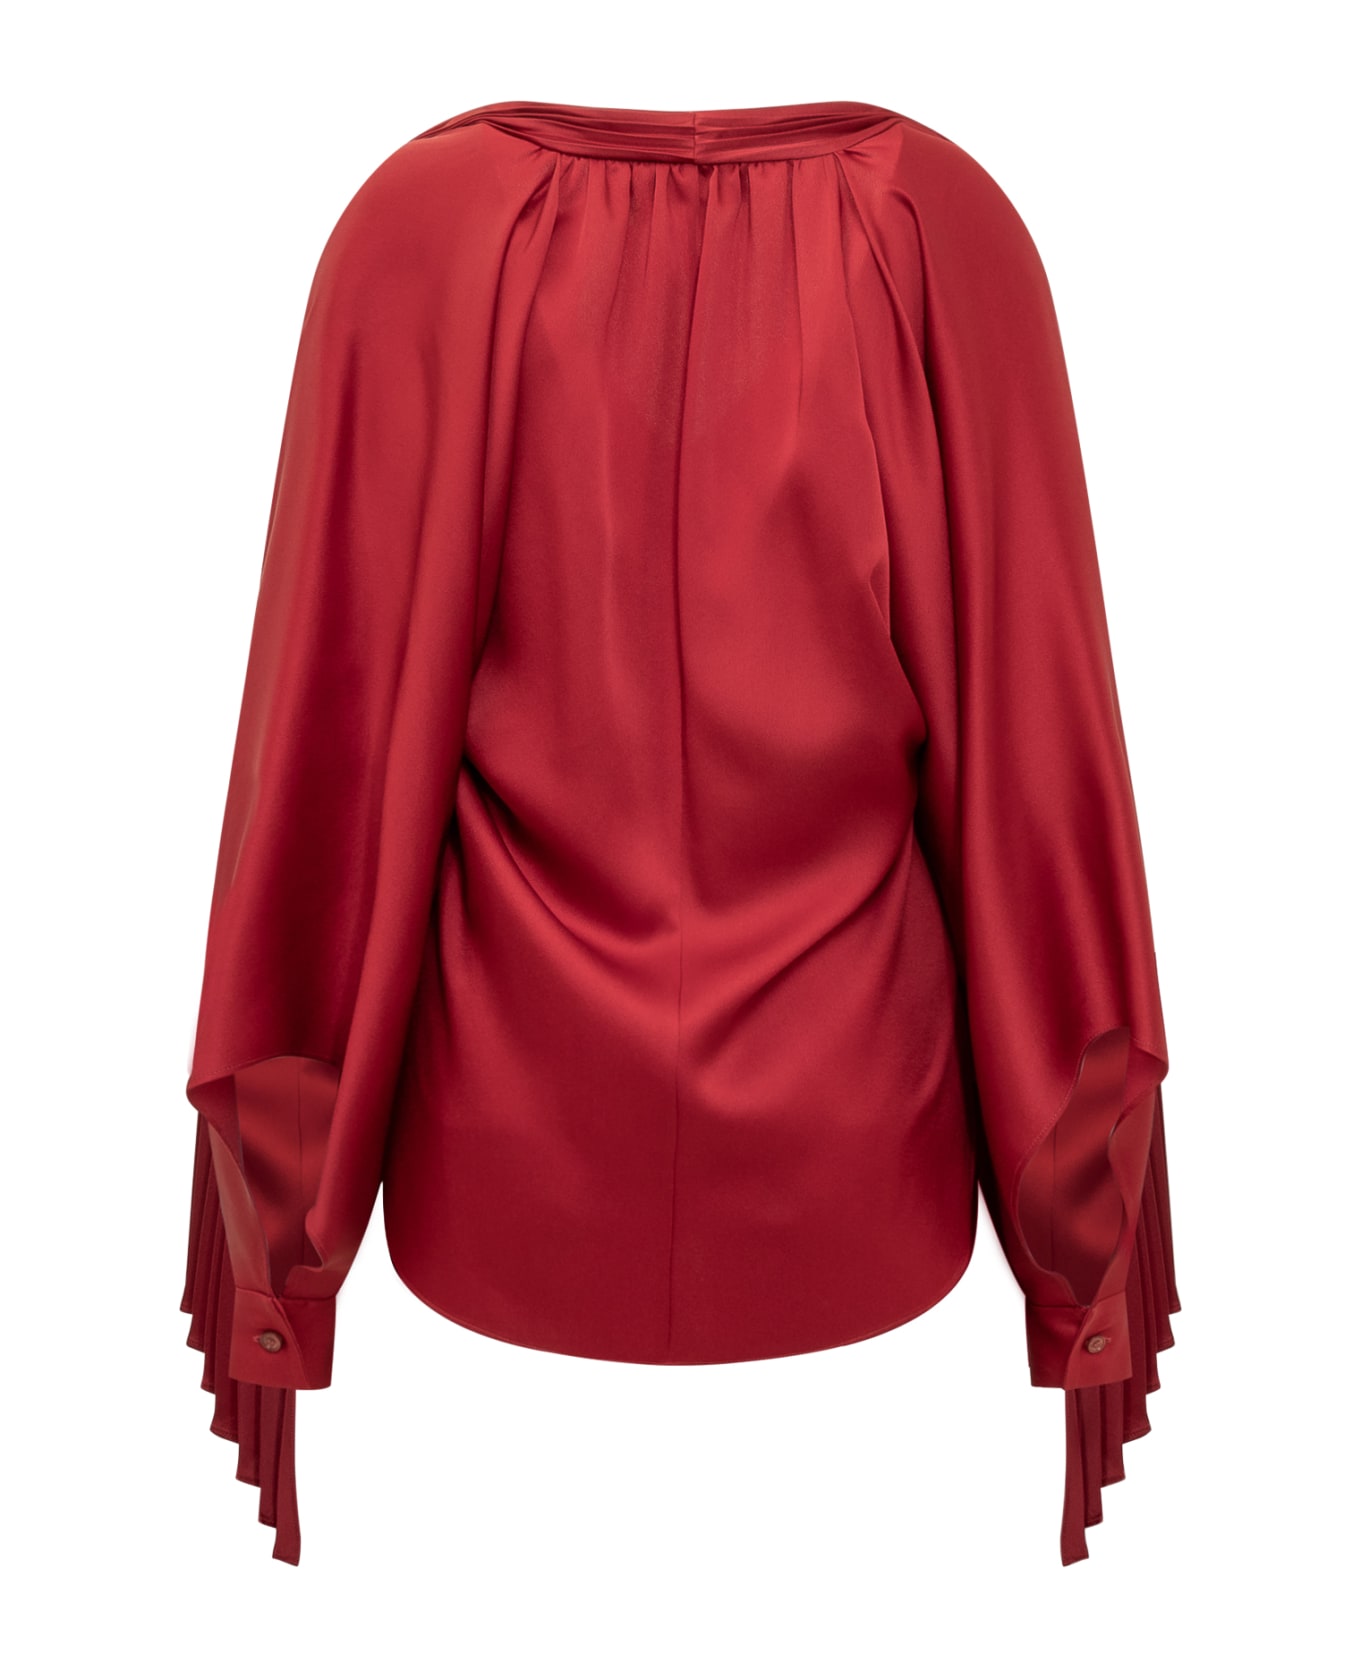 Del Core Draped Top With Scarf - Red